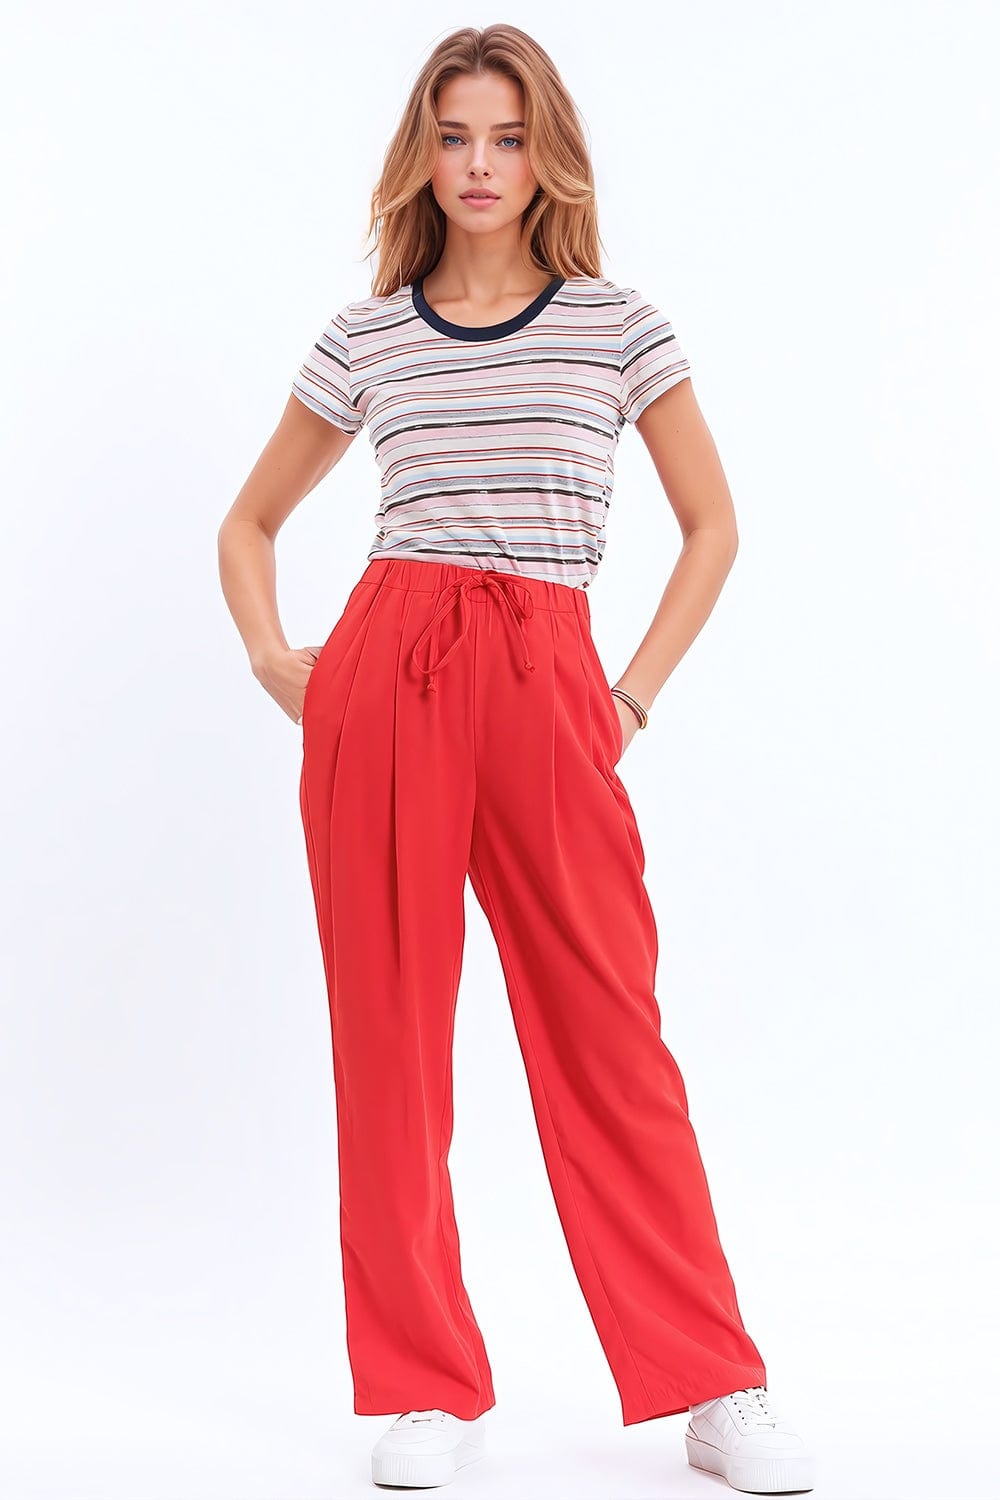 Q2 Women's Pants & Trousers Pants In Coral With Front Pockets And Drawstring Closing